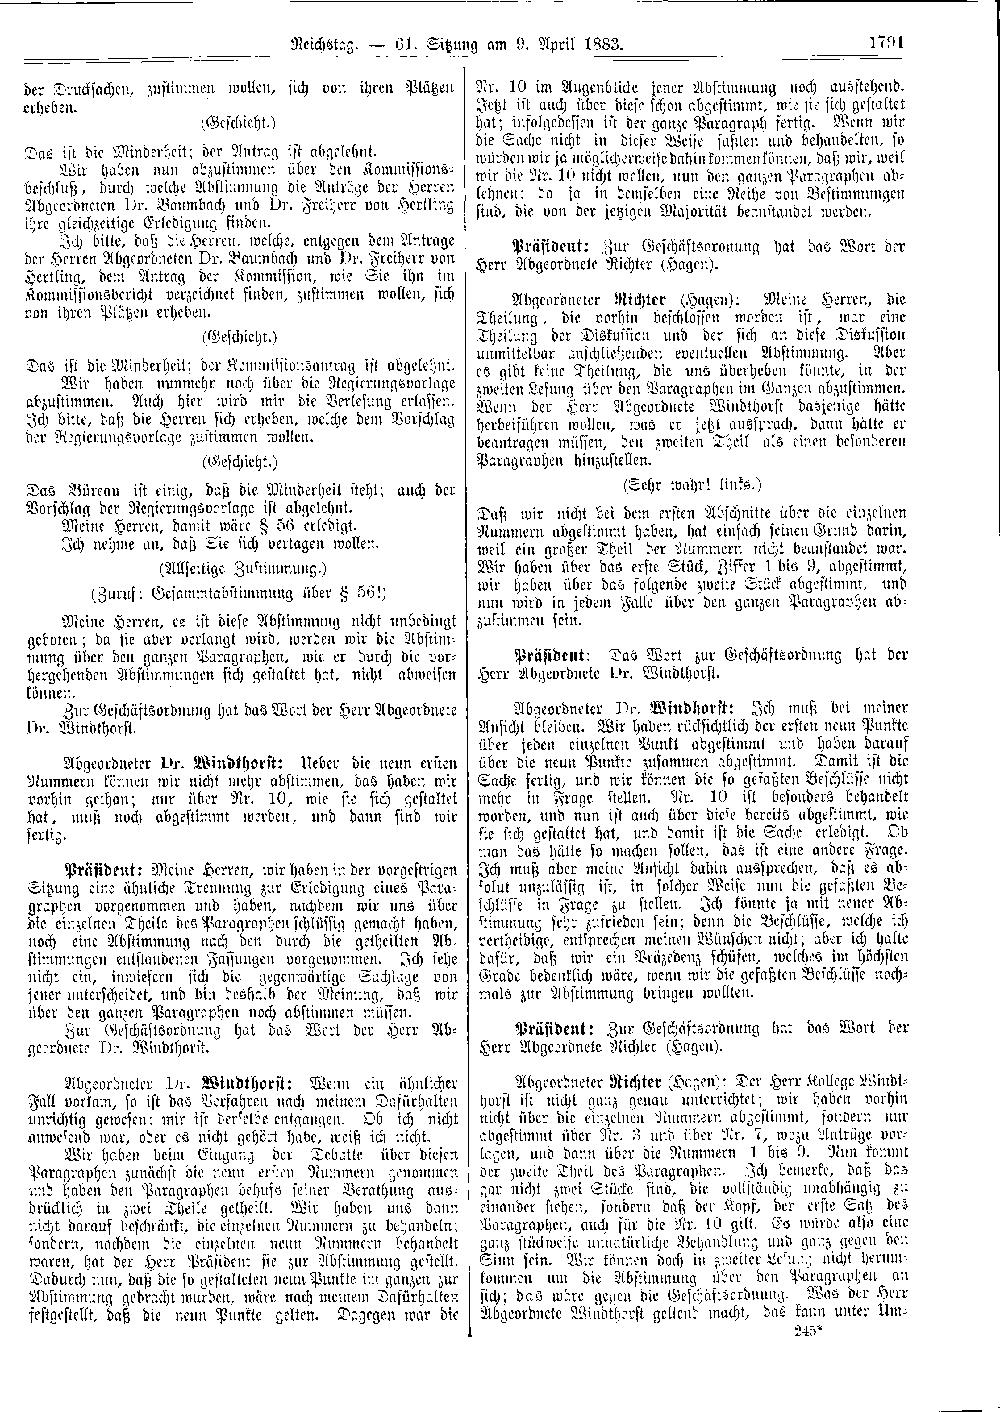 Scan of page 1791